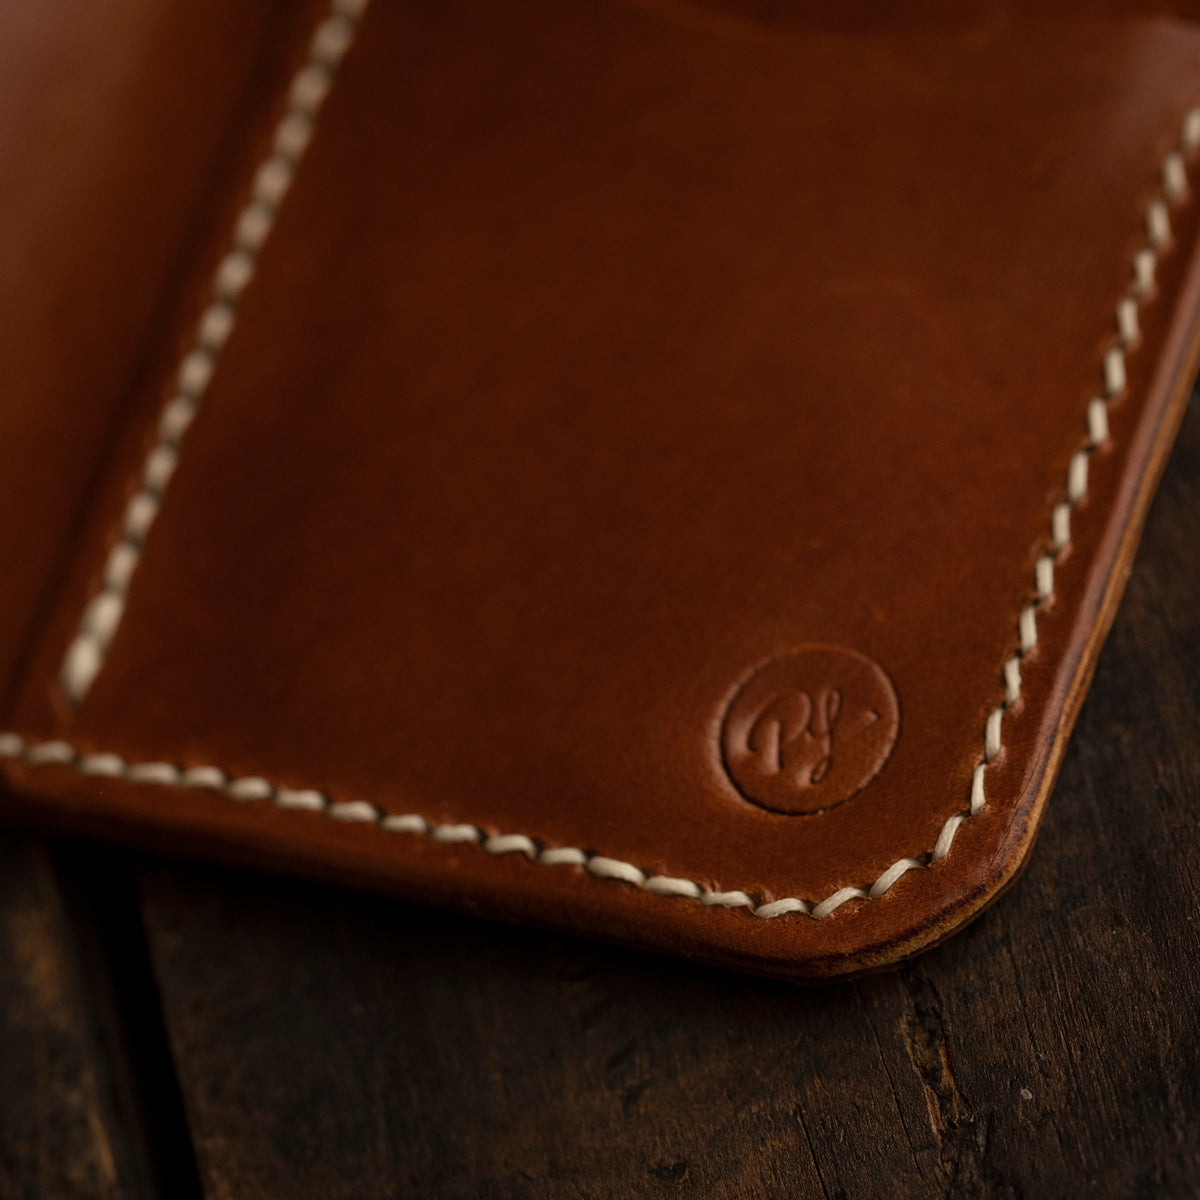 handmade leather bifold wallet with provision leatherworks logo